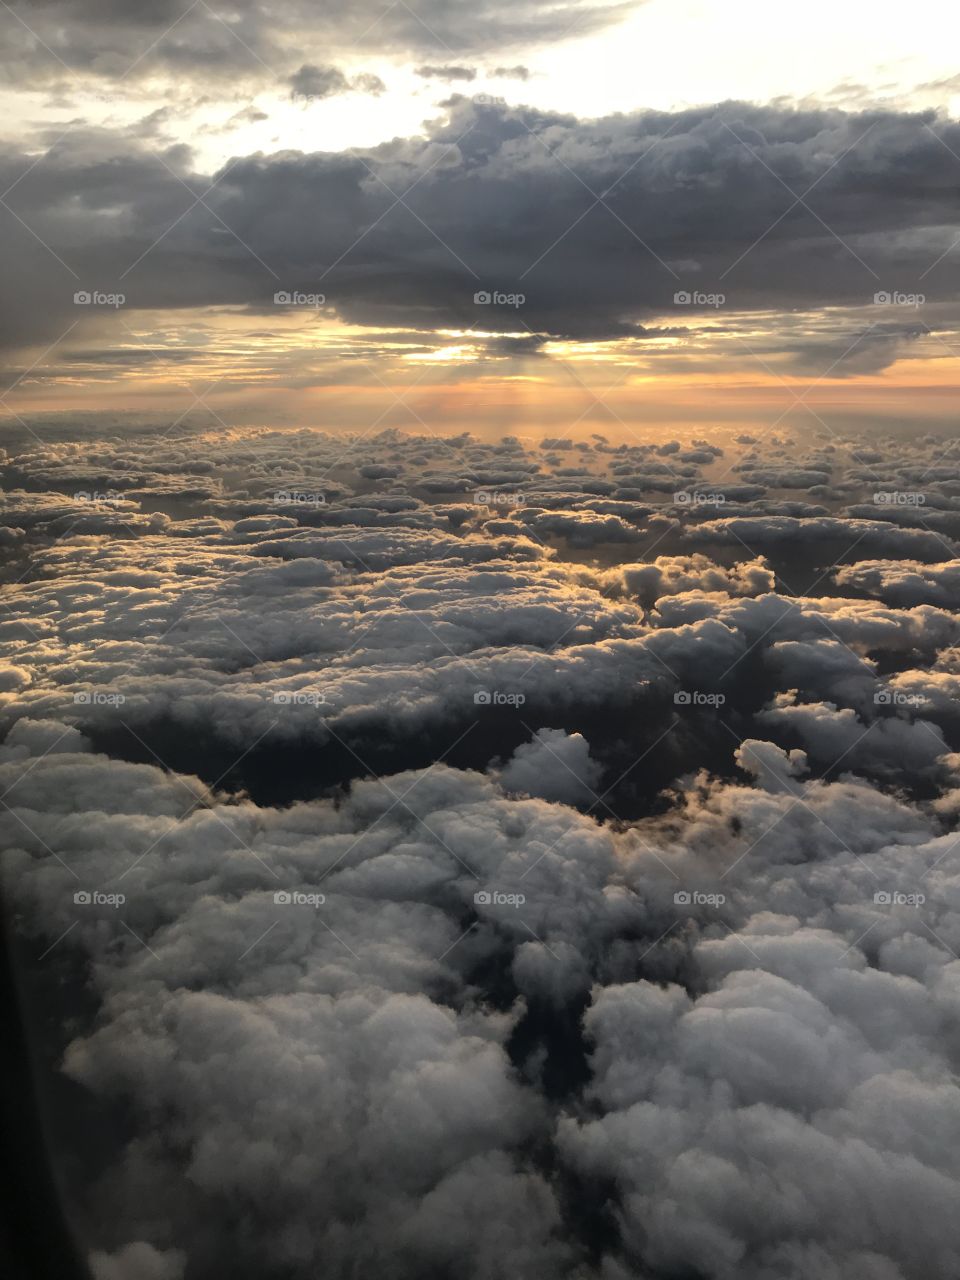 Taken from an airplane window early in the morning. Featuring rays of sun and a nice cloud bank. 